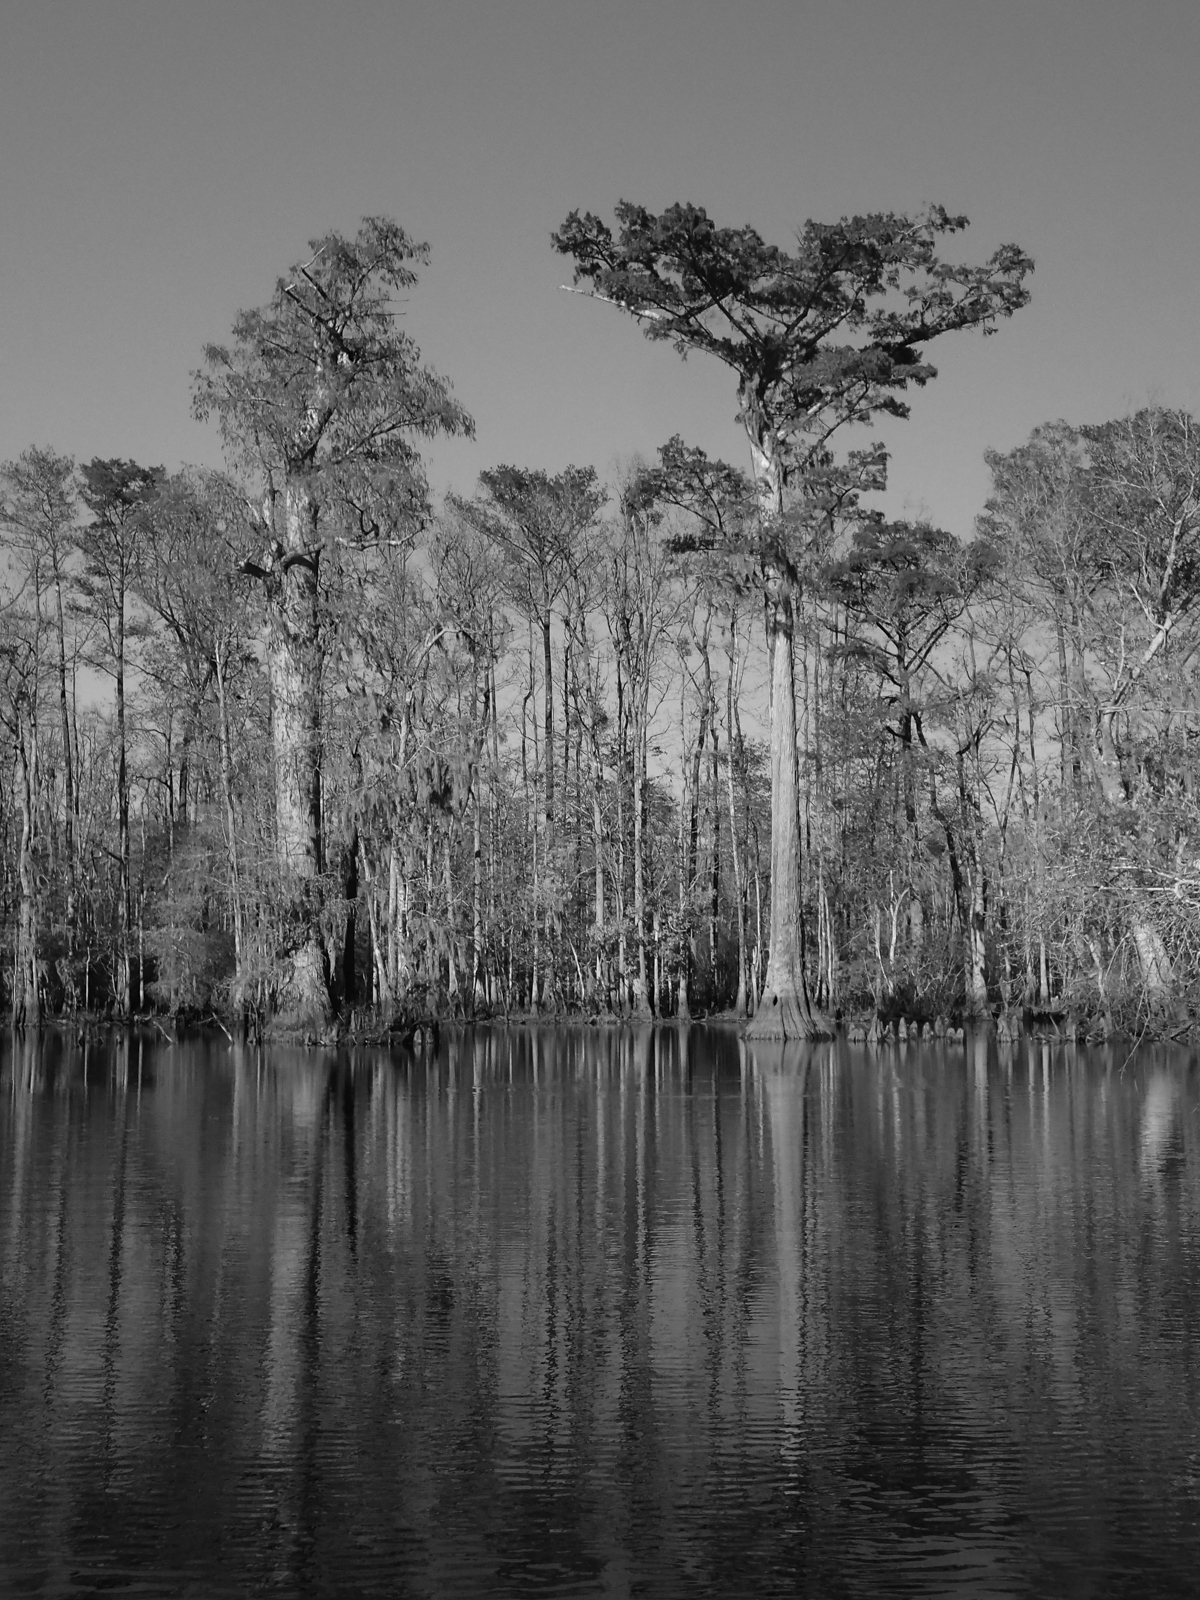 Bald cypress pair in black and white